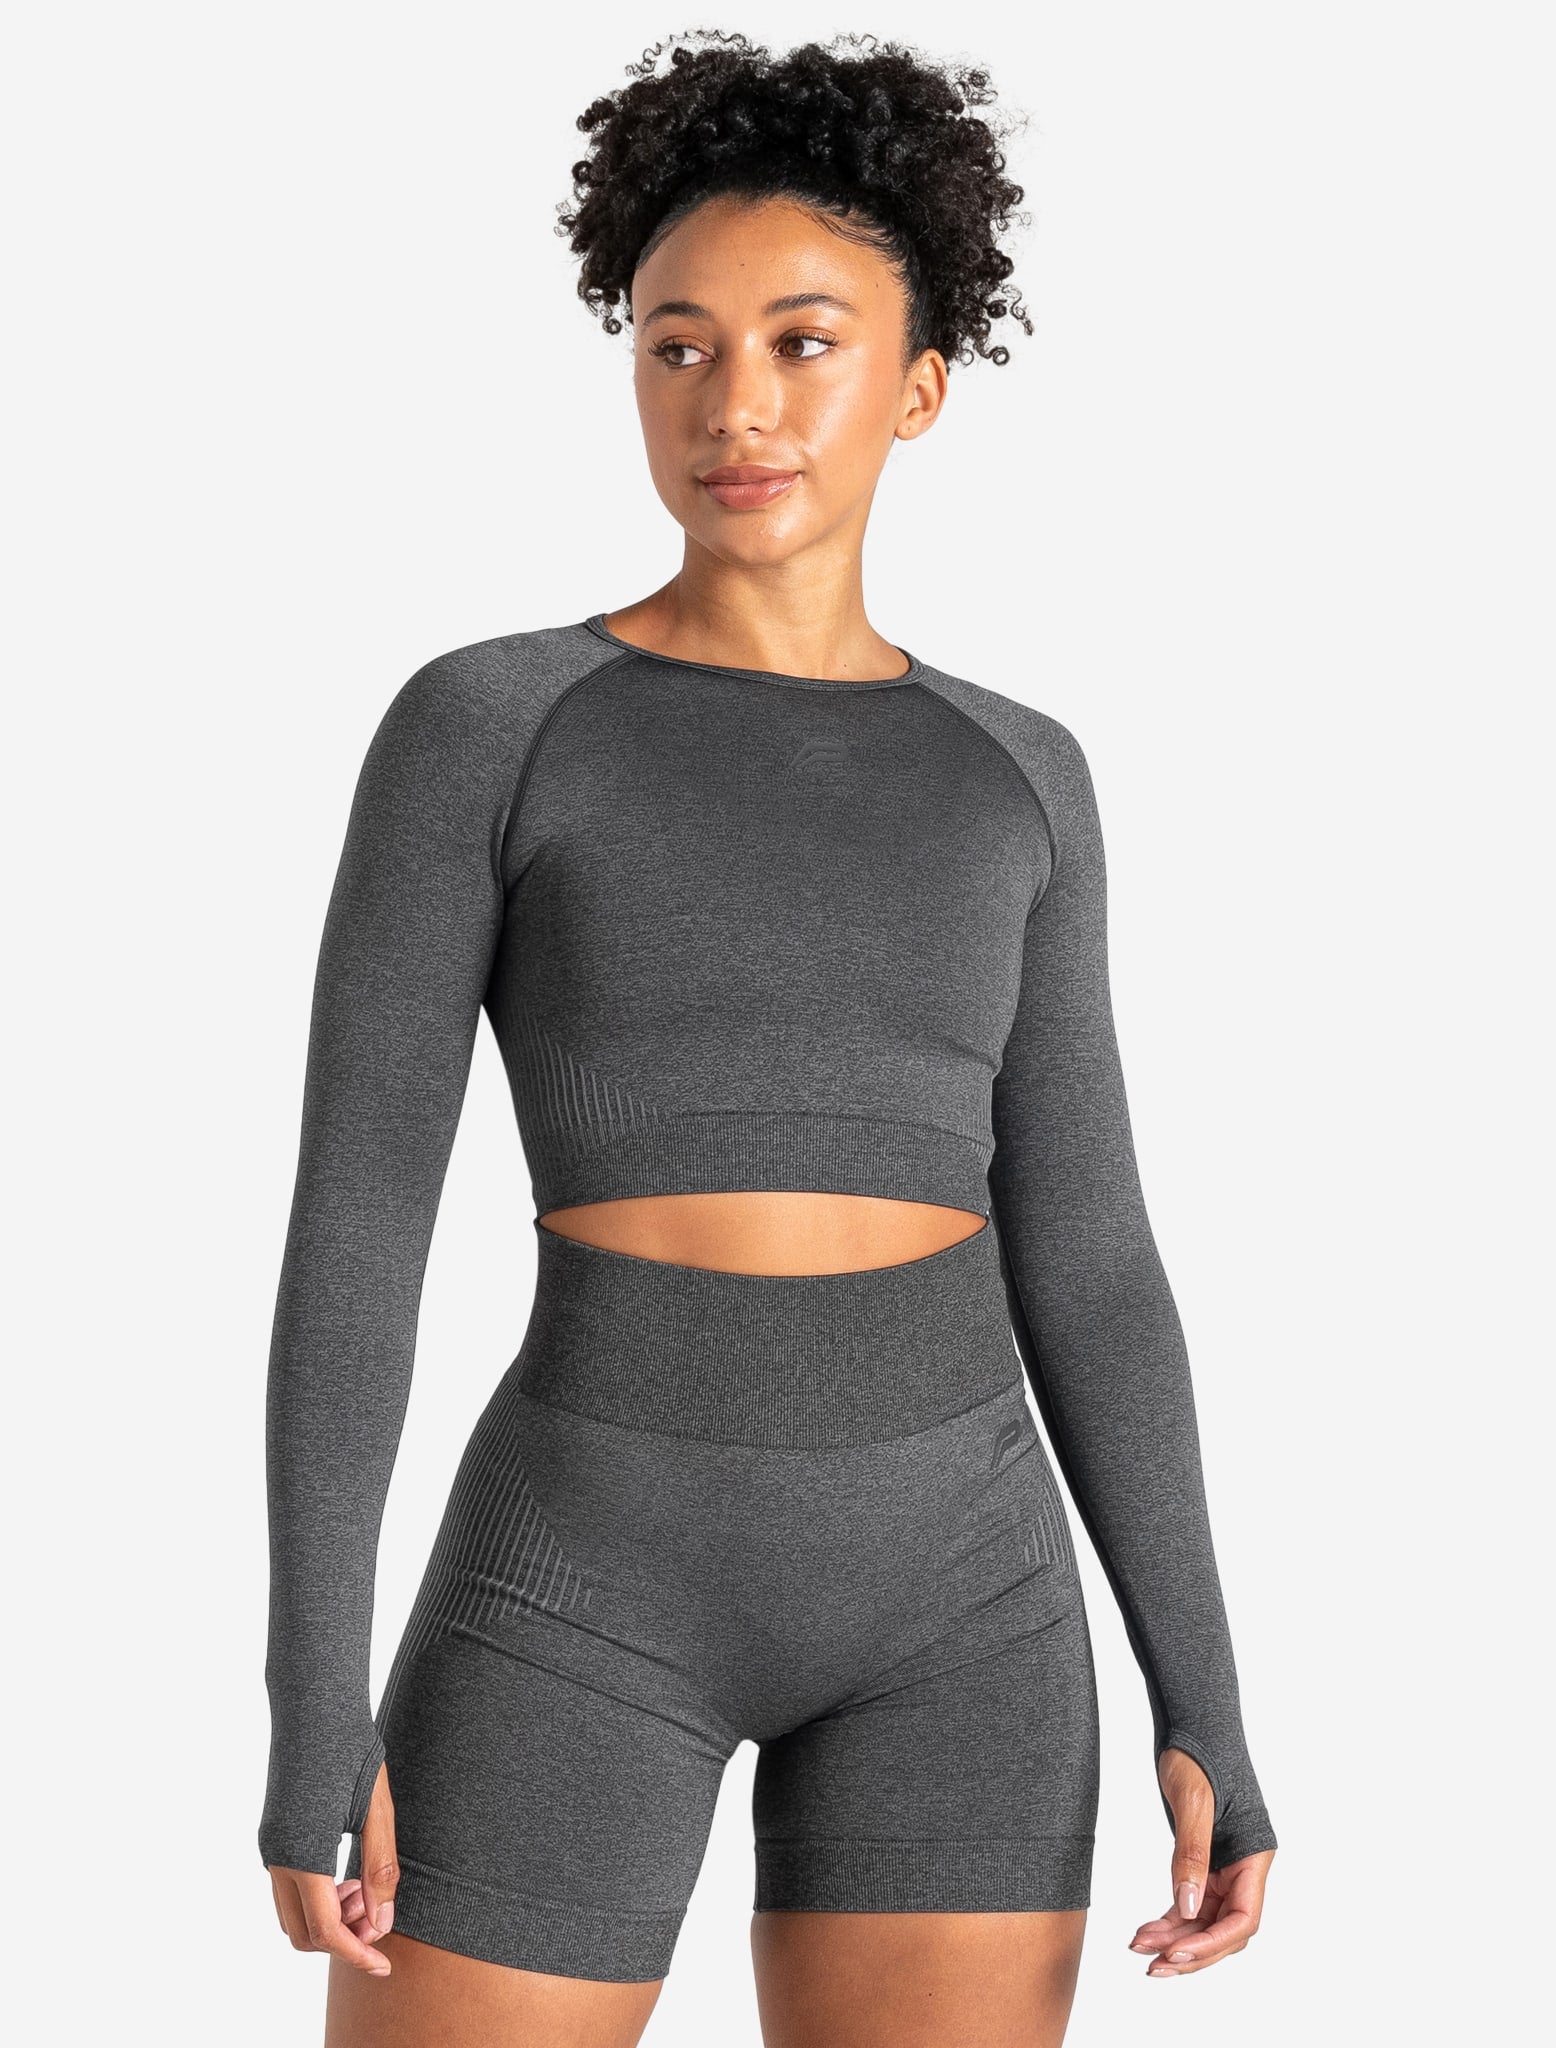 ADAPT 2.0 Seamless Crop Top - Charcoal Pursue Fitness 1